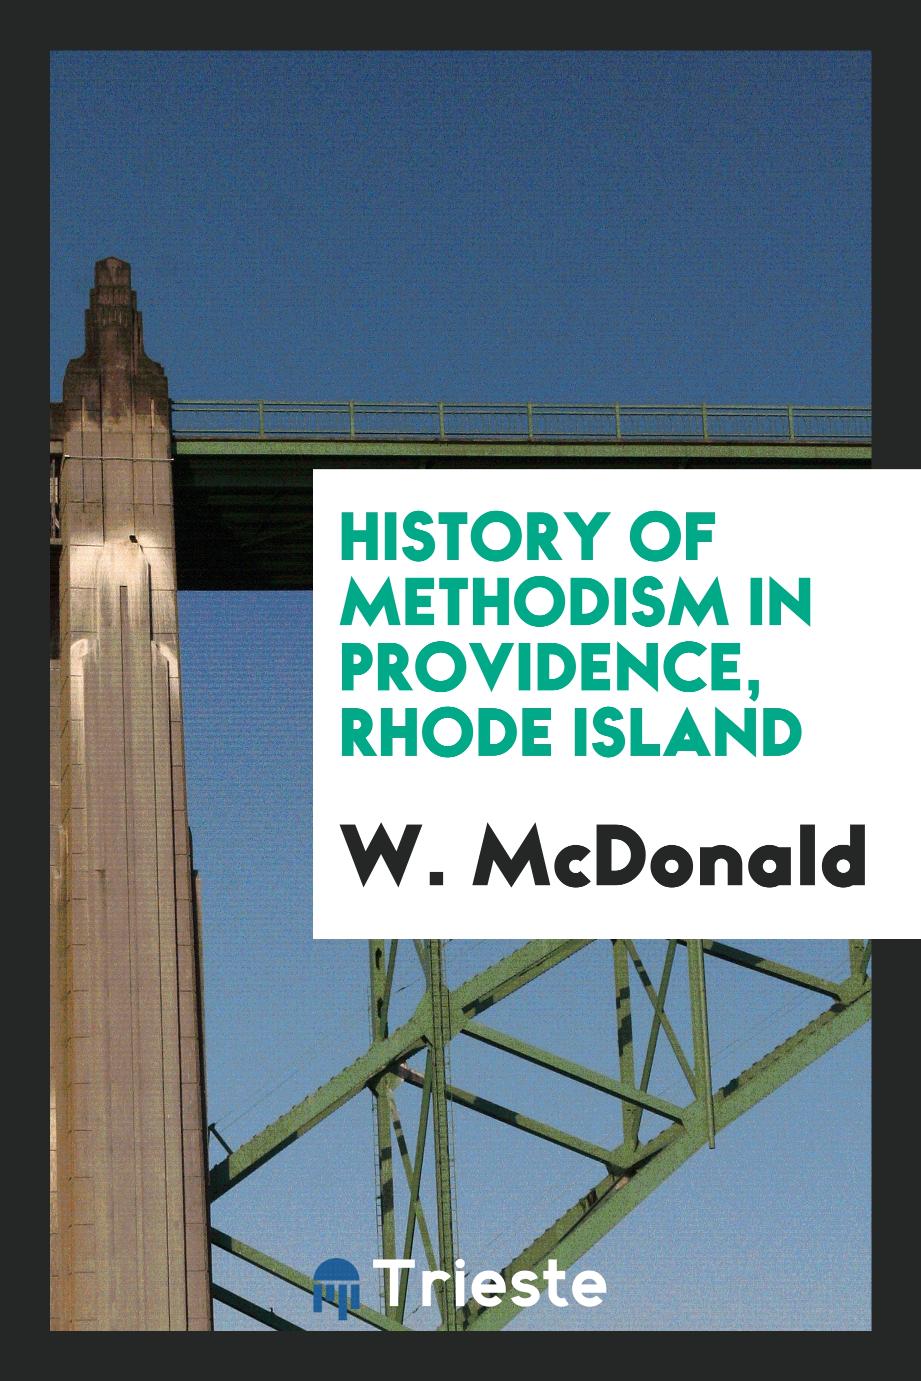 History of Methodism in Providence, Rhode Island